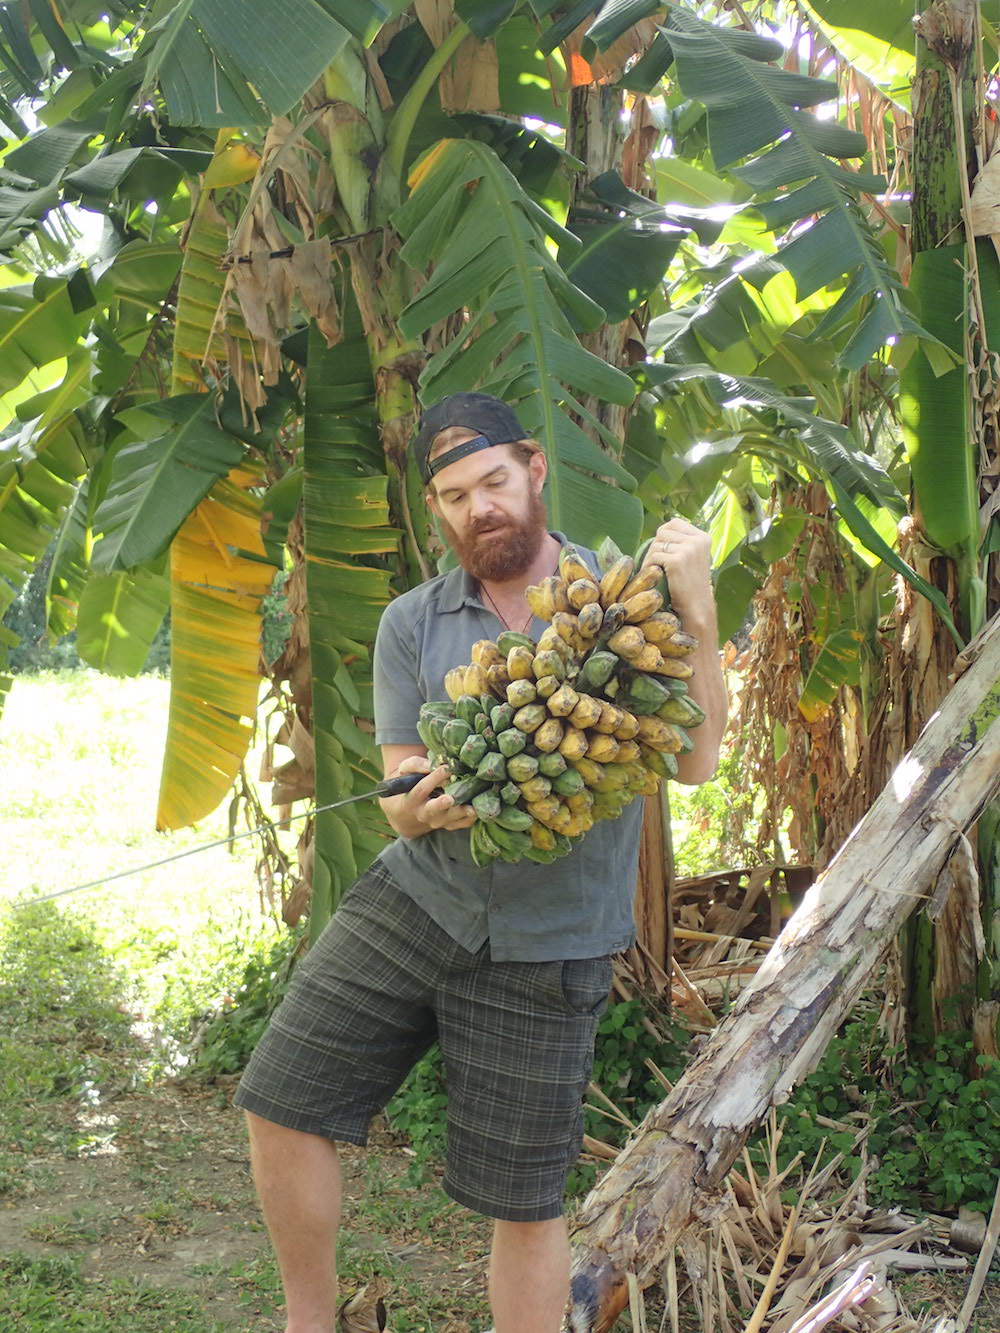 Bananas will be one of the crops grown at Lawaetz Museum for the Farm to School program, according to Ridge to Reef farmer Nate Olive.